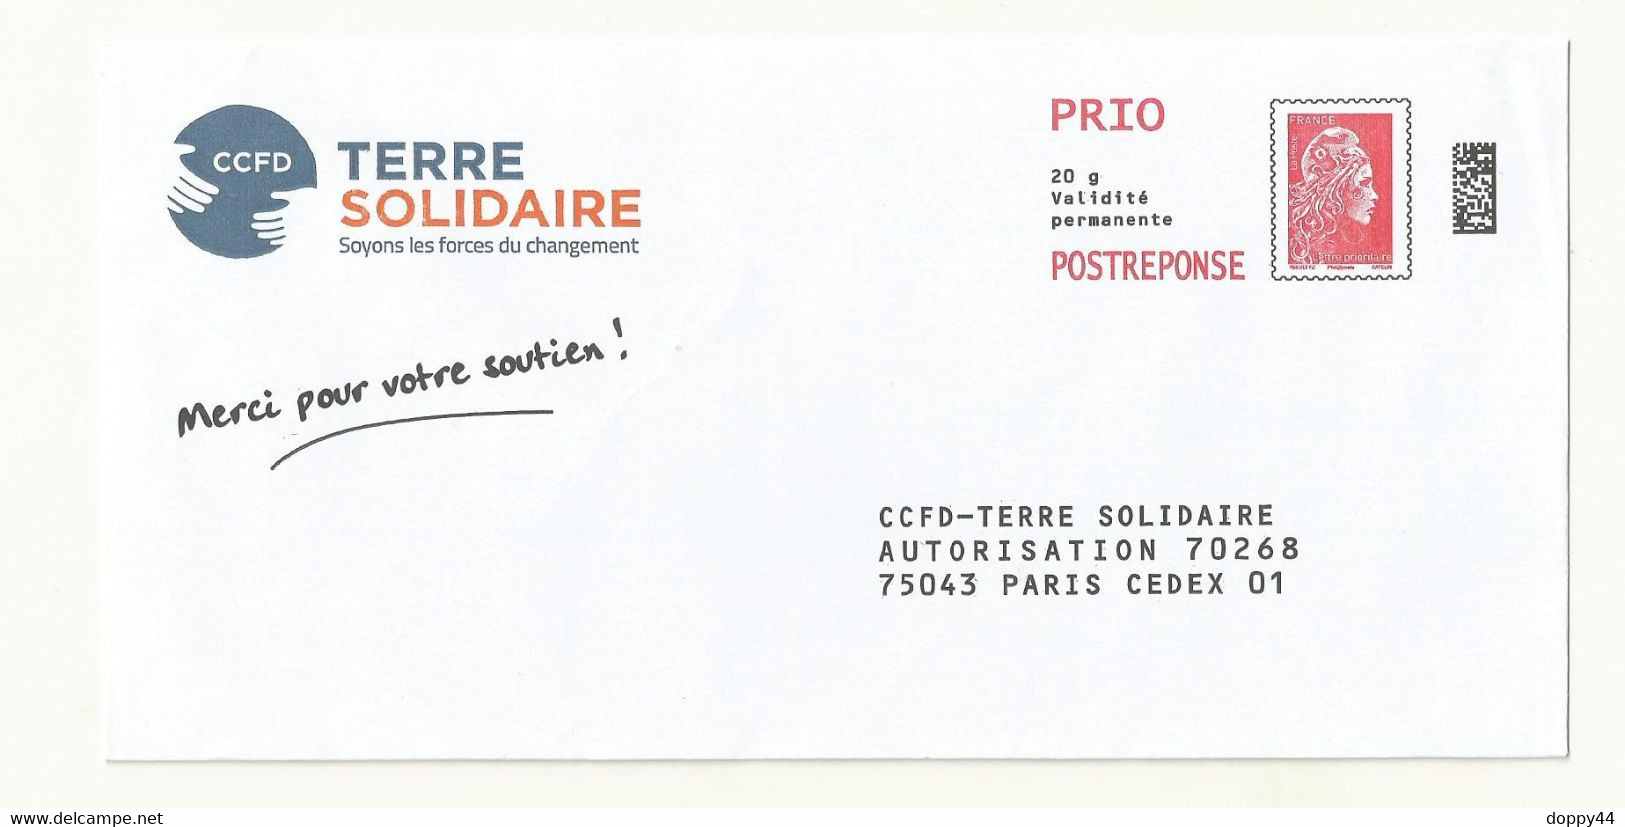 POSTREPONSE PRIO CCFD-TERRE SOLIDAIRE LOT 273030. - PAP: Antwort/Marianne L'Engagée